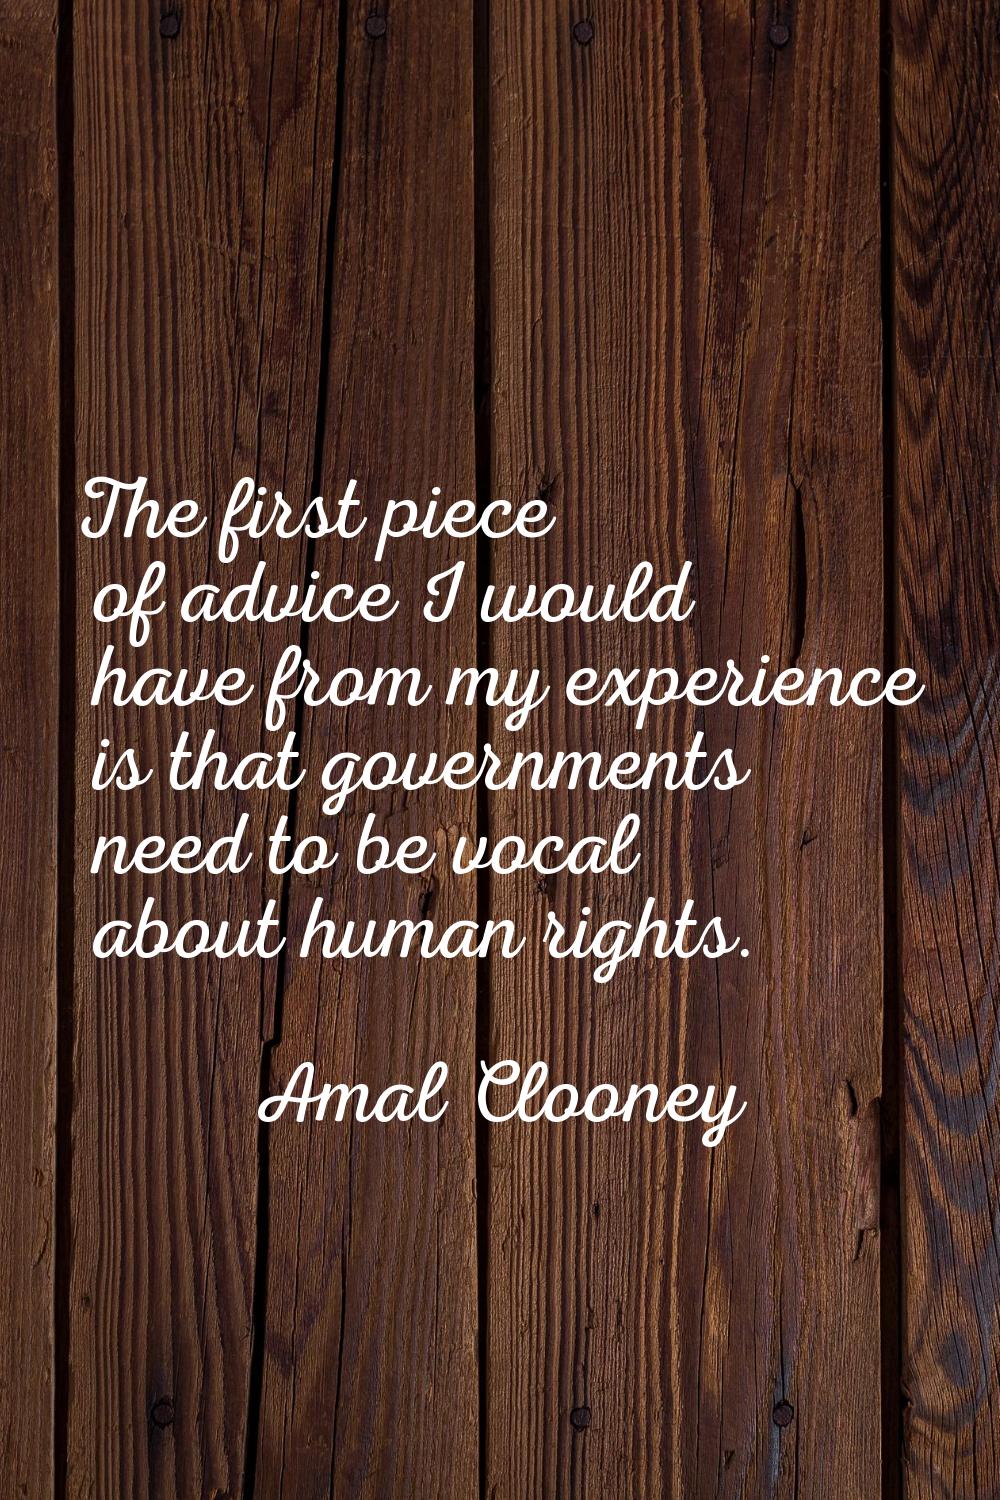 The first piece of advice I would have from my experience is that governments need to be vocal abou